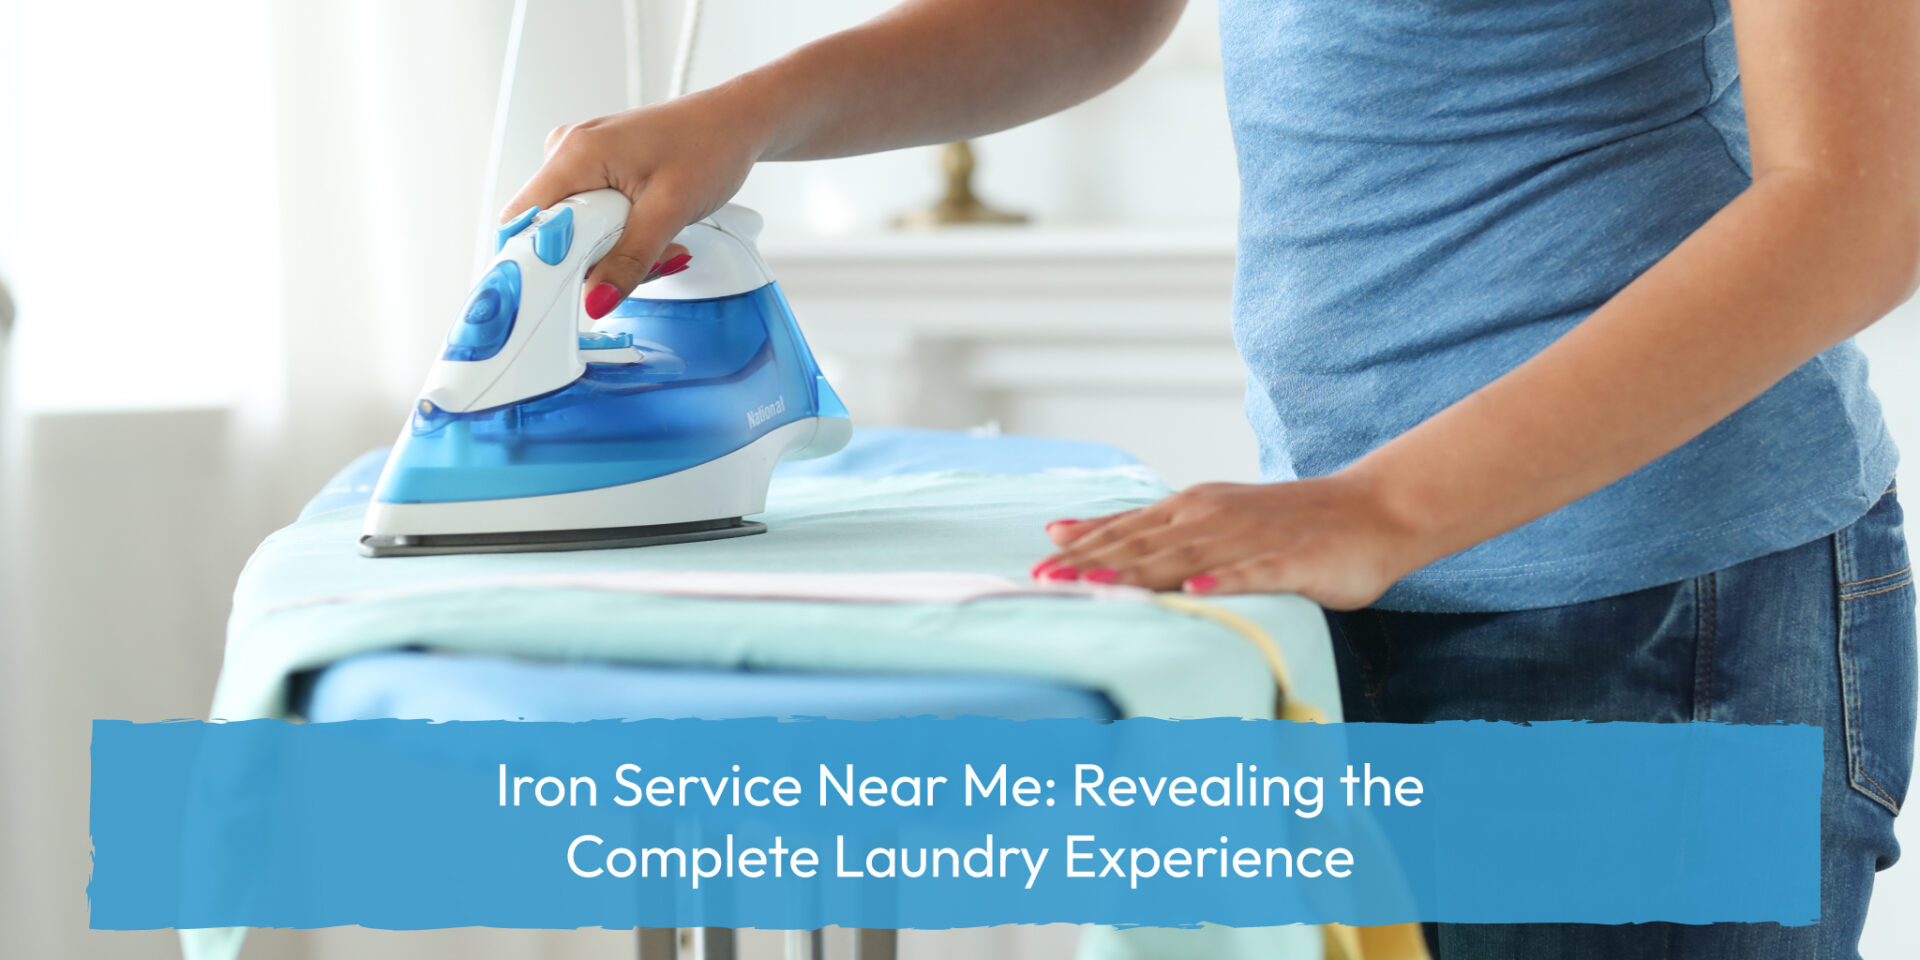 Iron Service Near Me: Revealing the Complete Laundry Experience